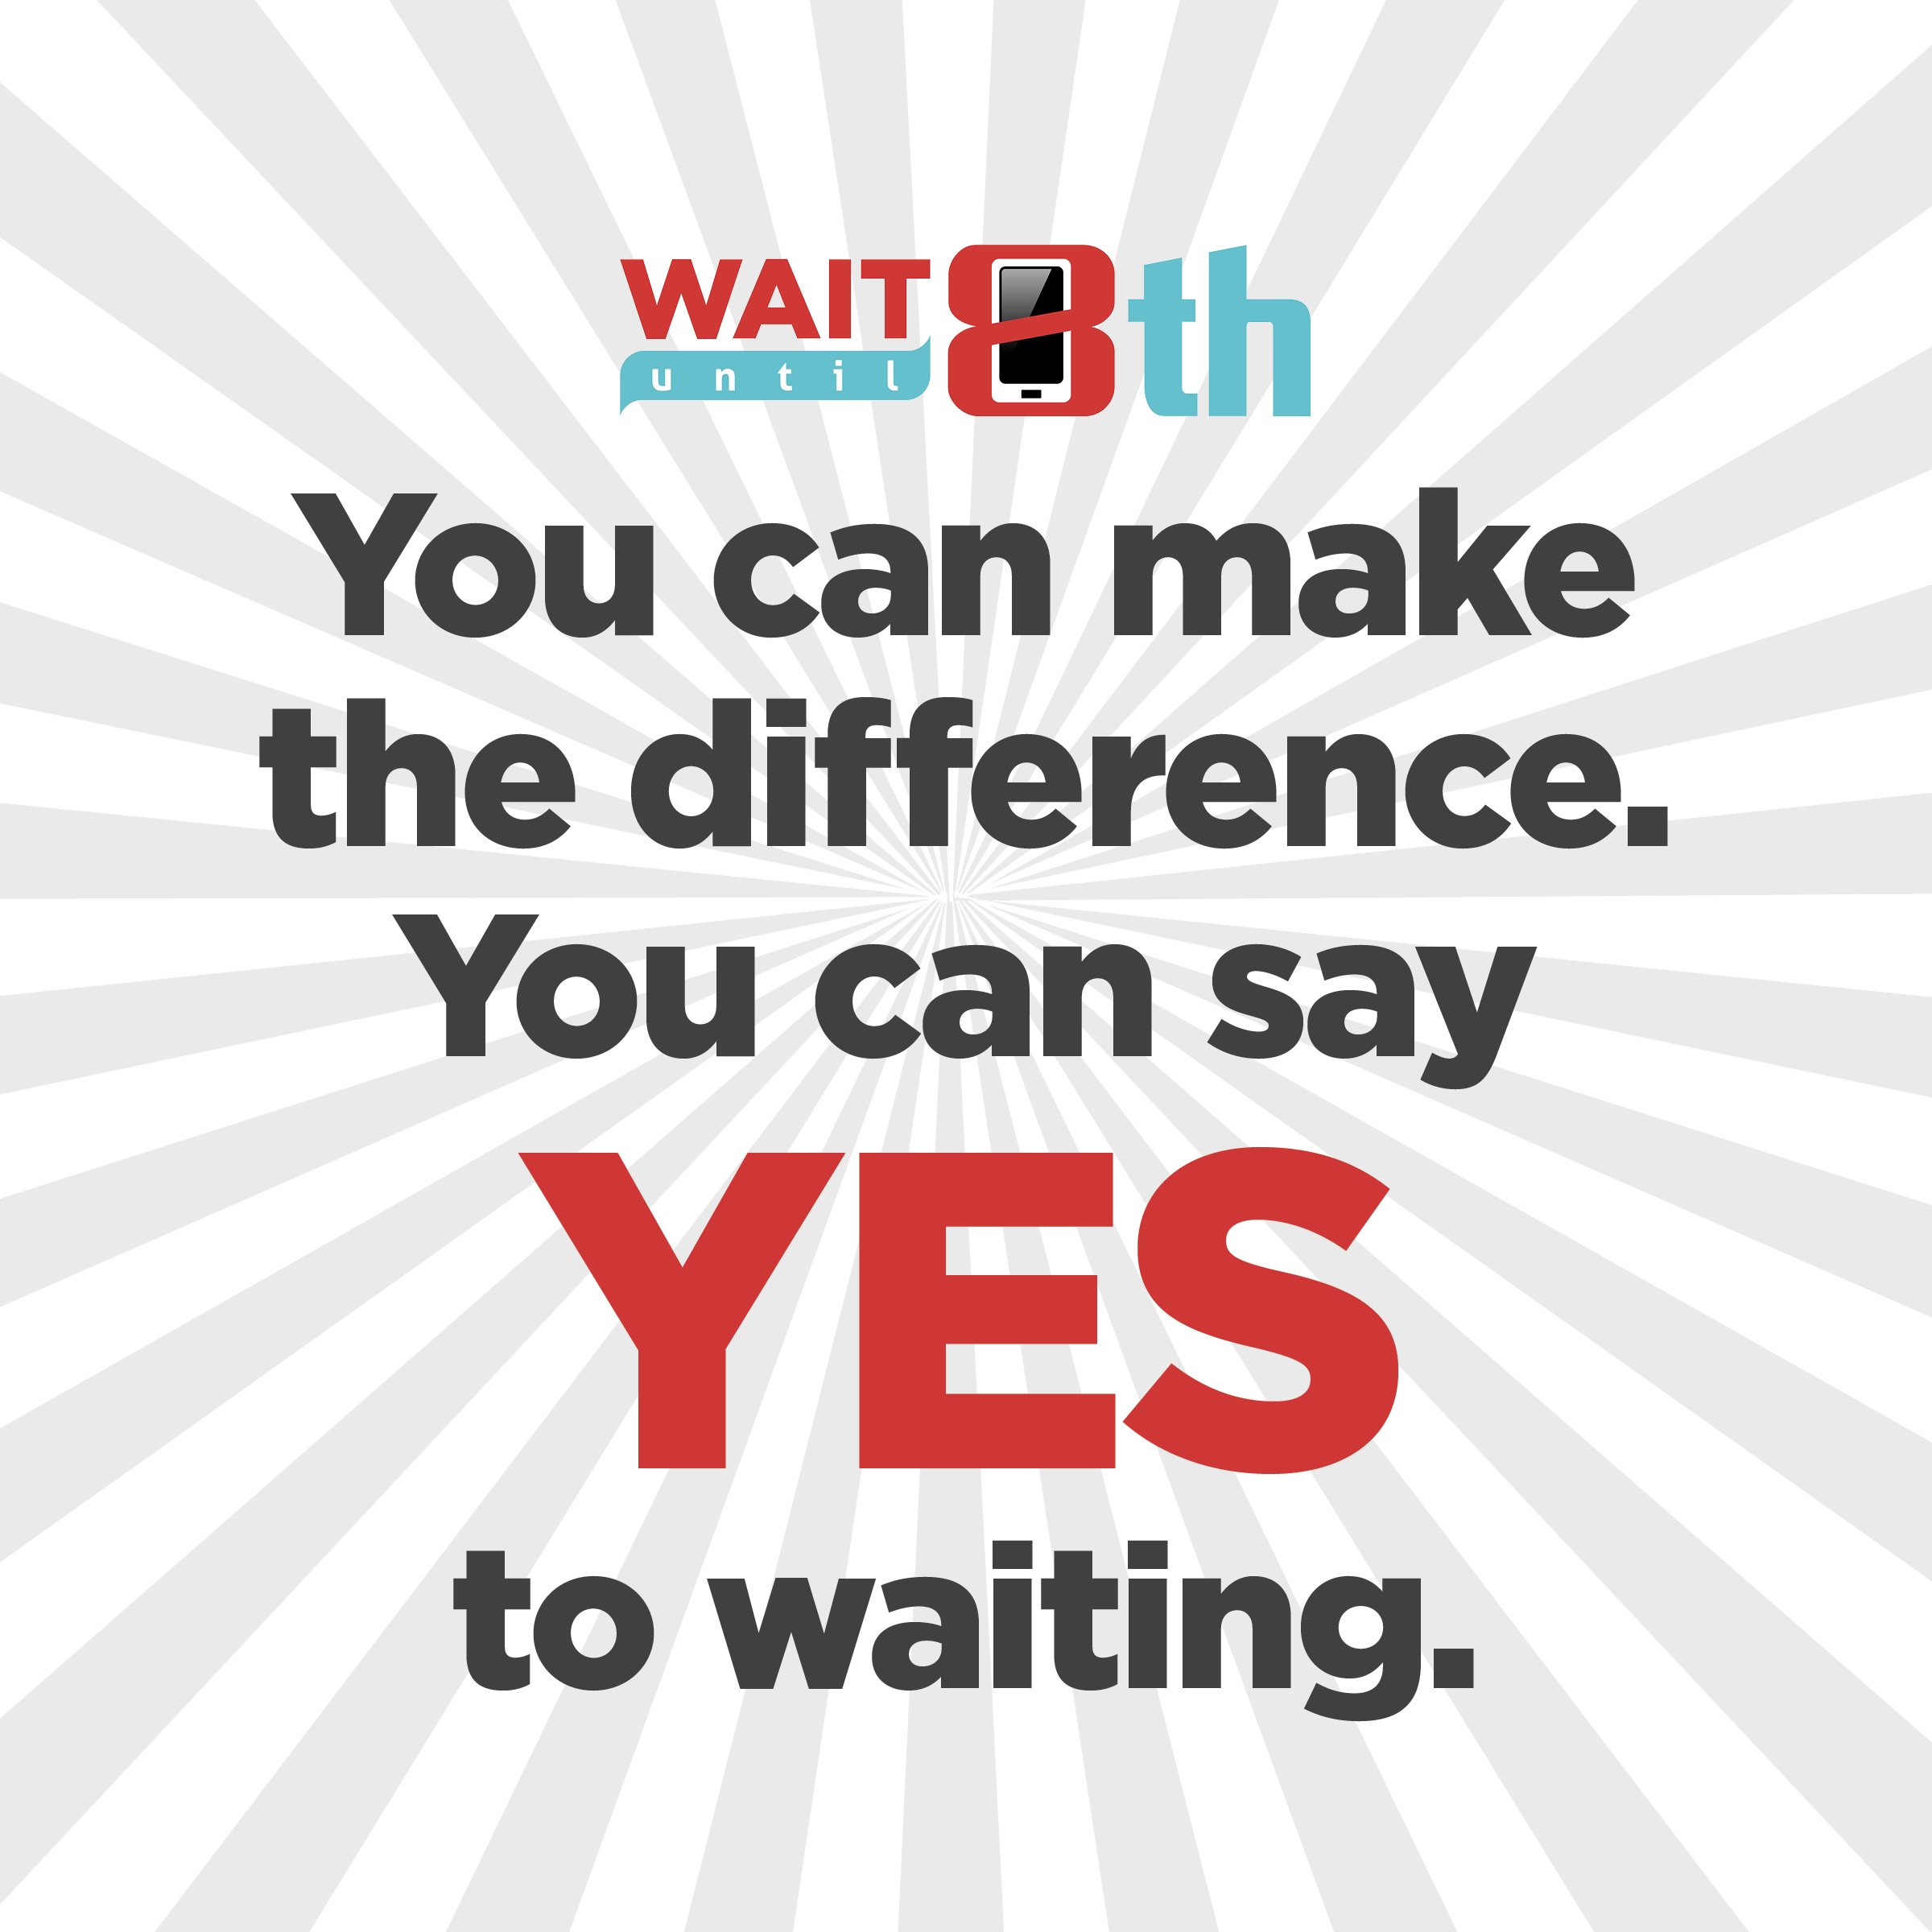 You can say yes to waiting.